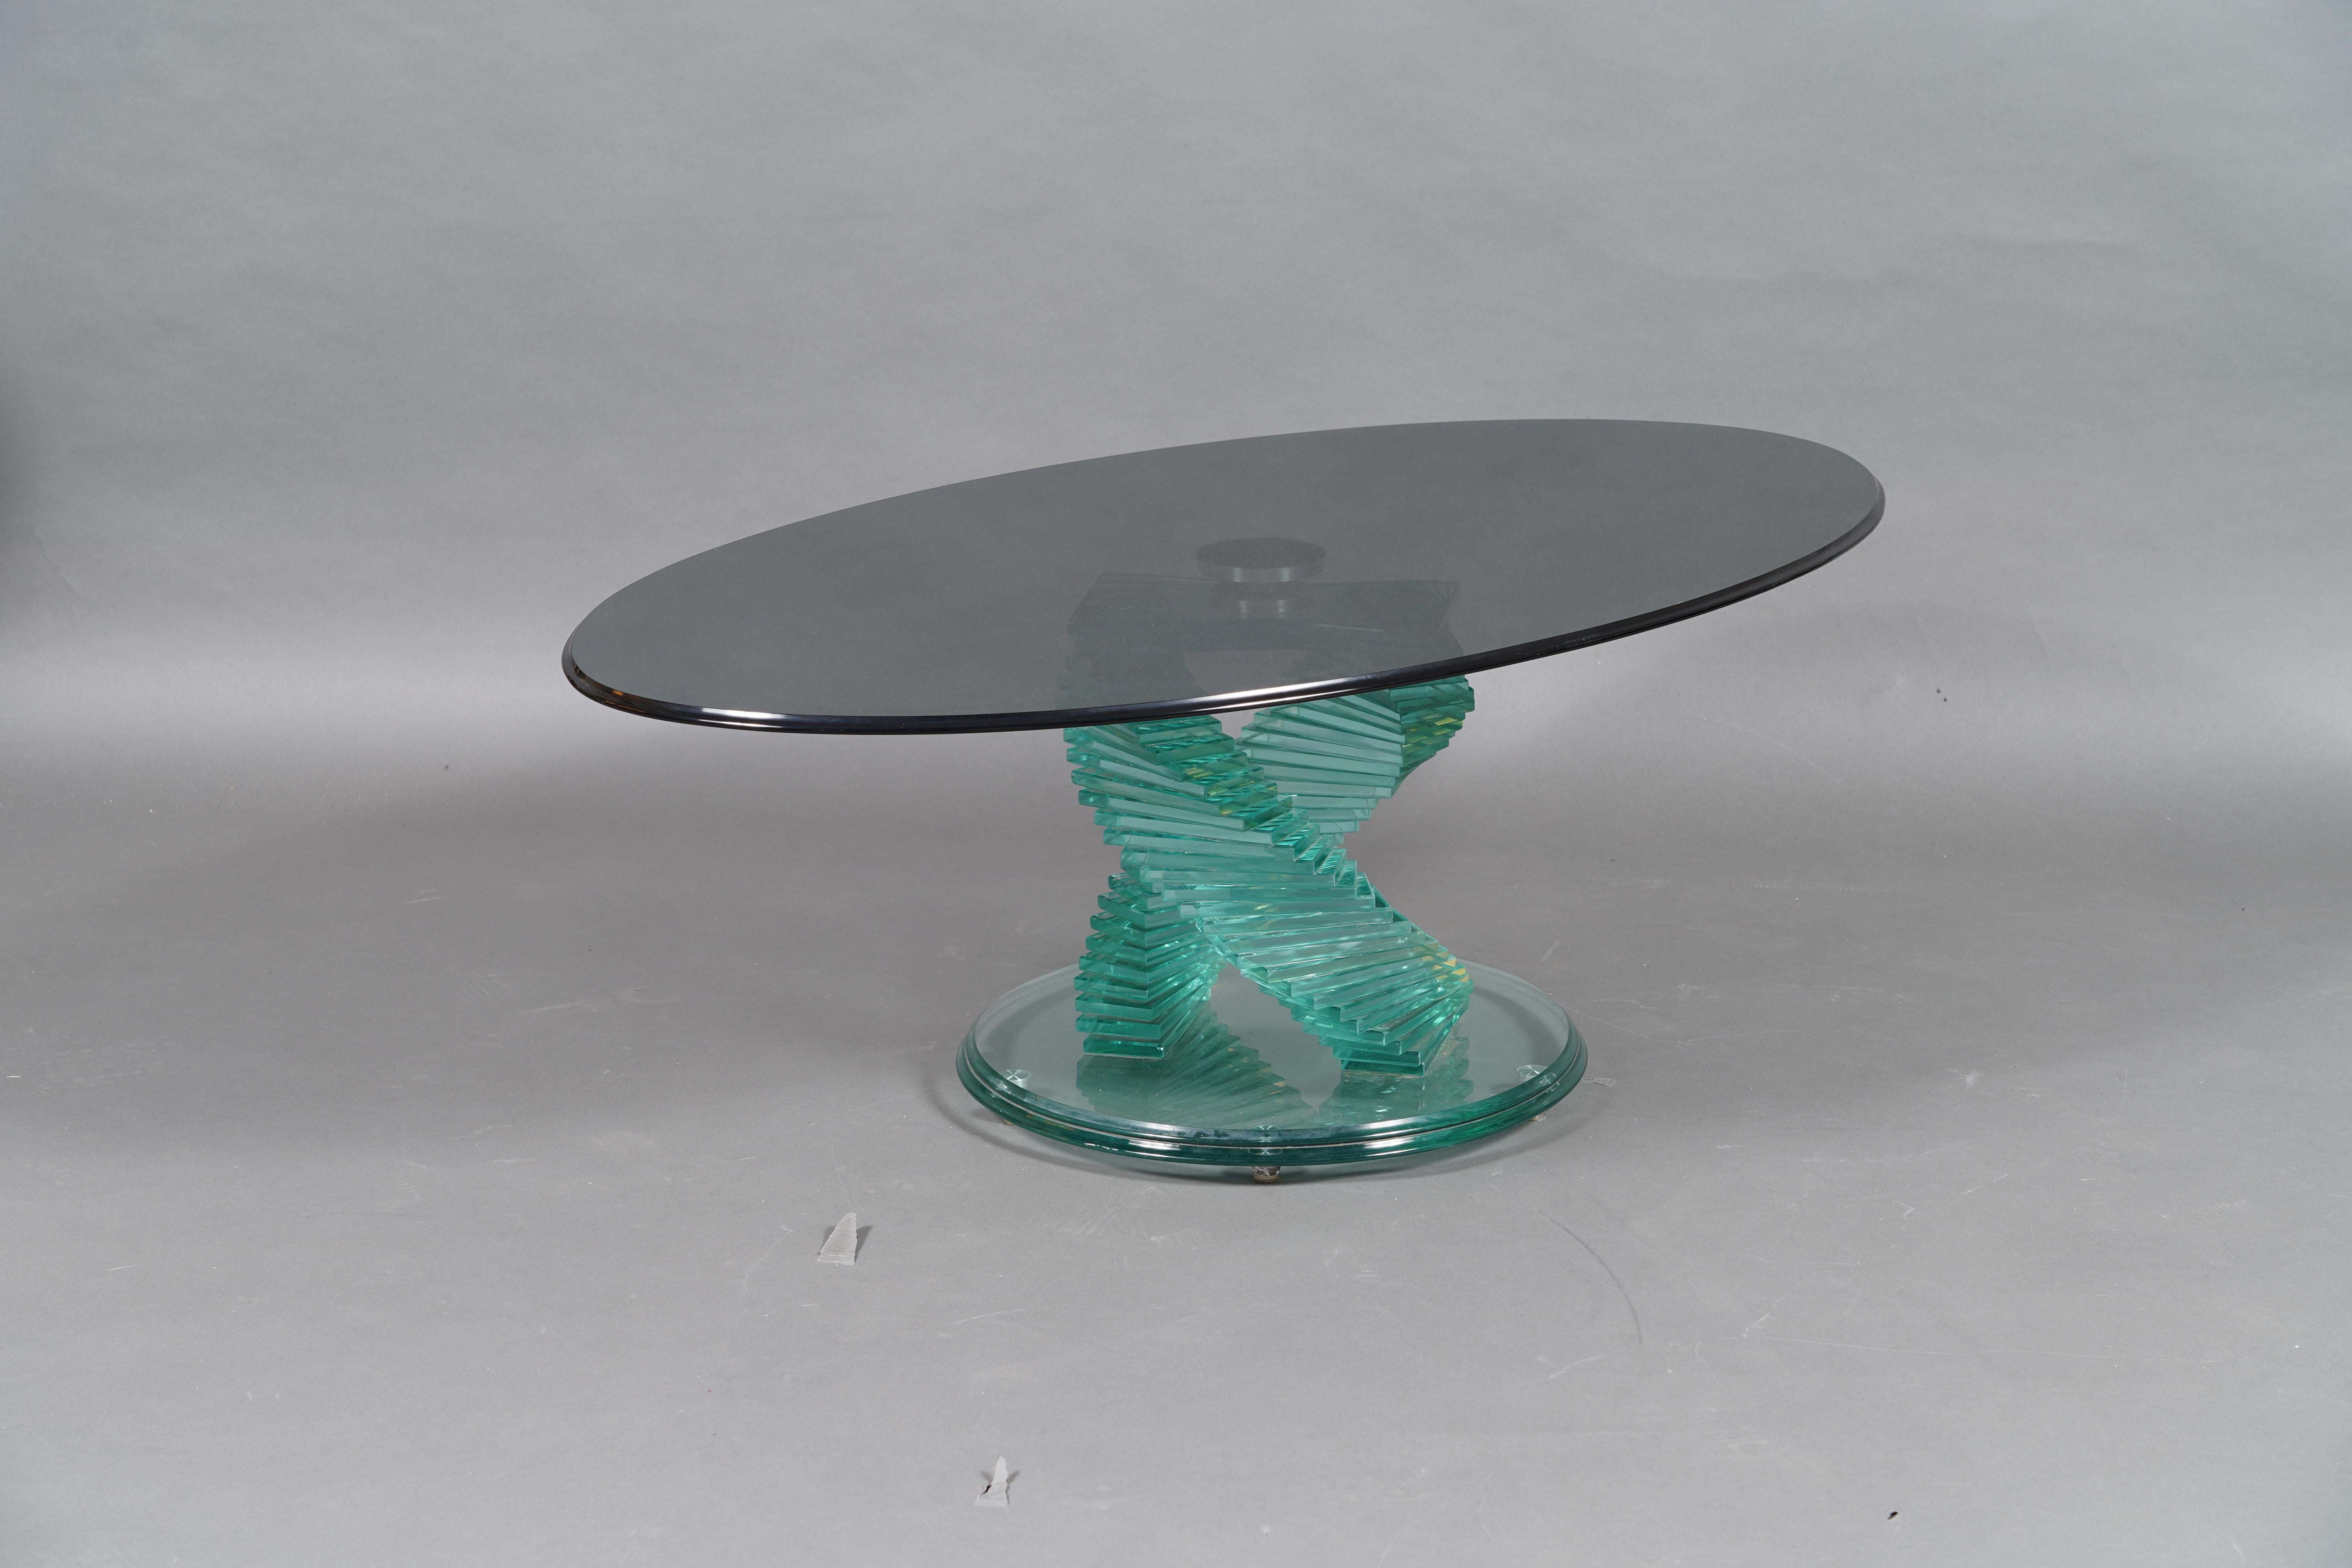 Beautiful vintage low table inspired by the style of Danny Lane, helix spiral stacked glass with removable oval stained glass top. The unique helical spiral design, with neatly stacked rectangles of glass, creates a striking aesthetic. The oval